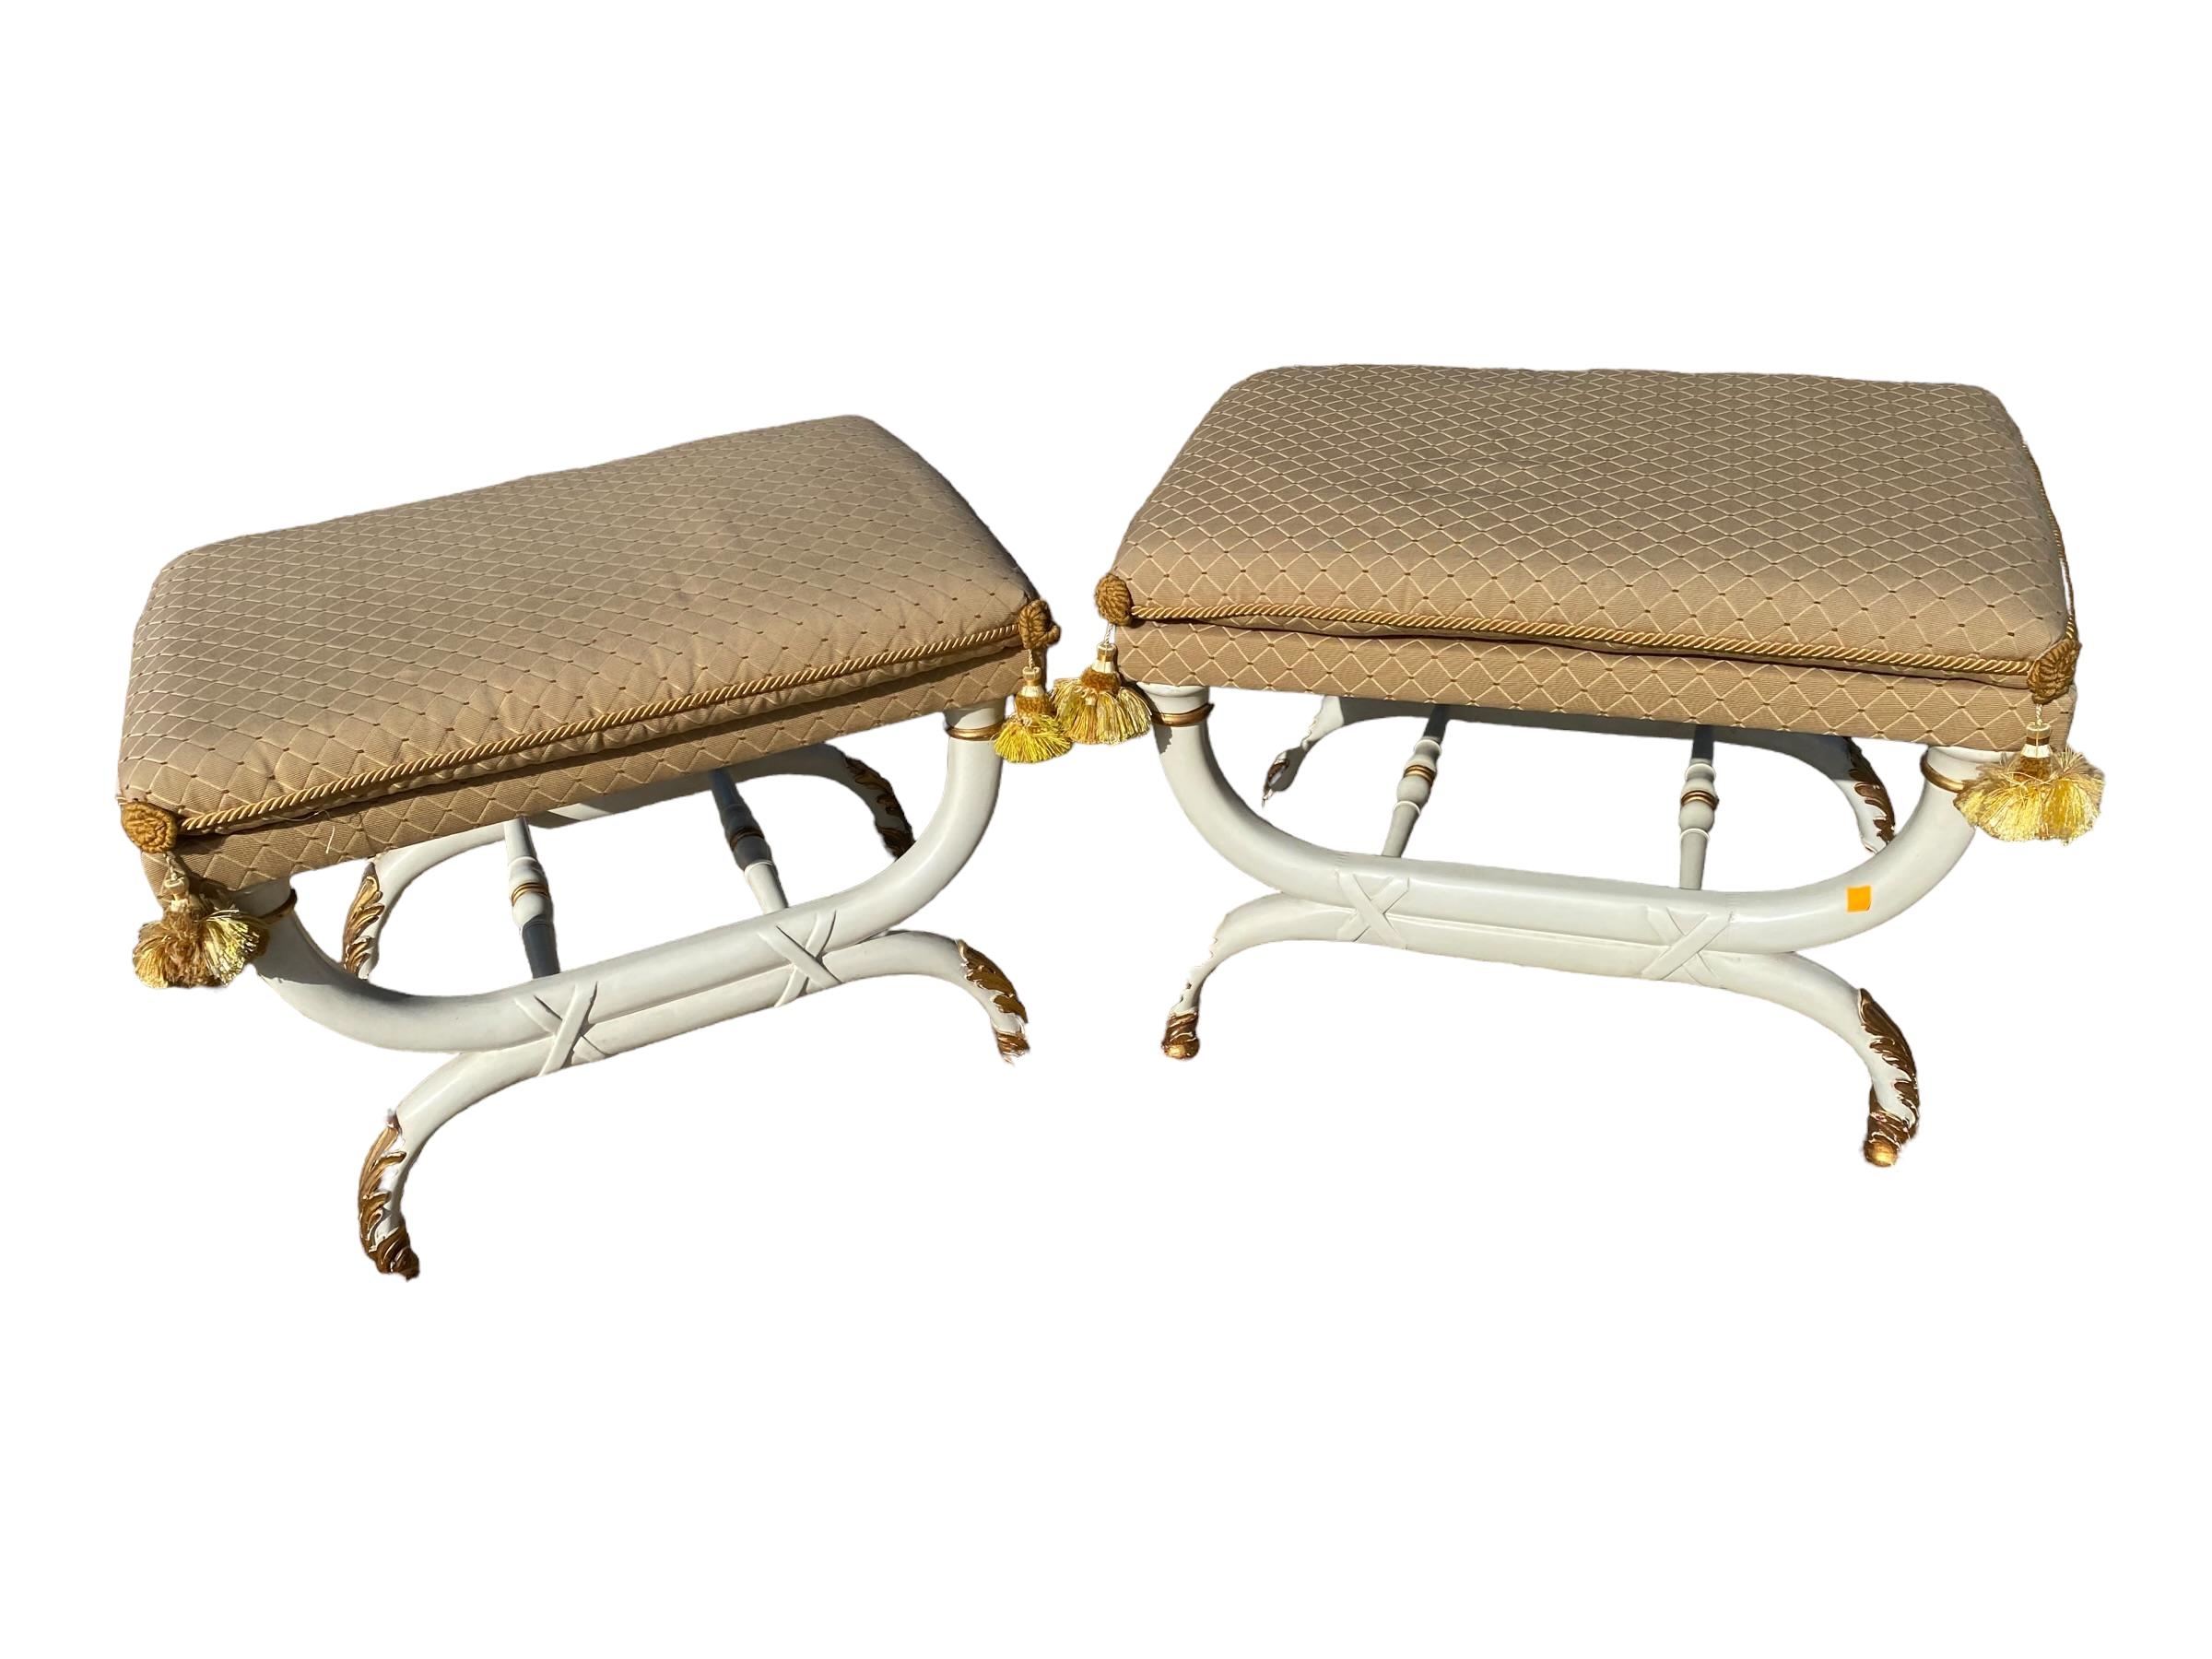 Pair of Regency style x framed upholstered stools, painted with gilt decoration with upholstered